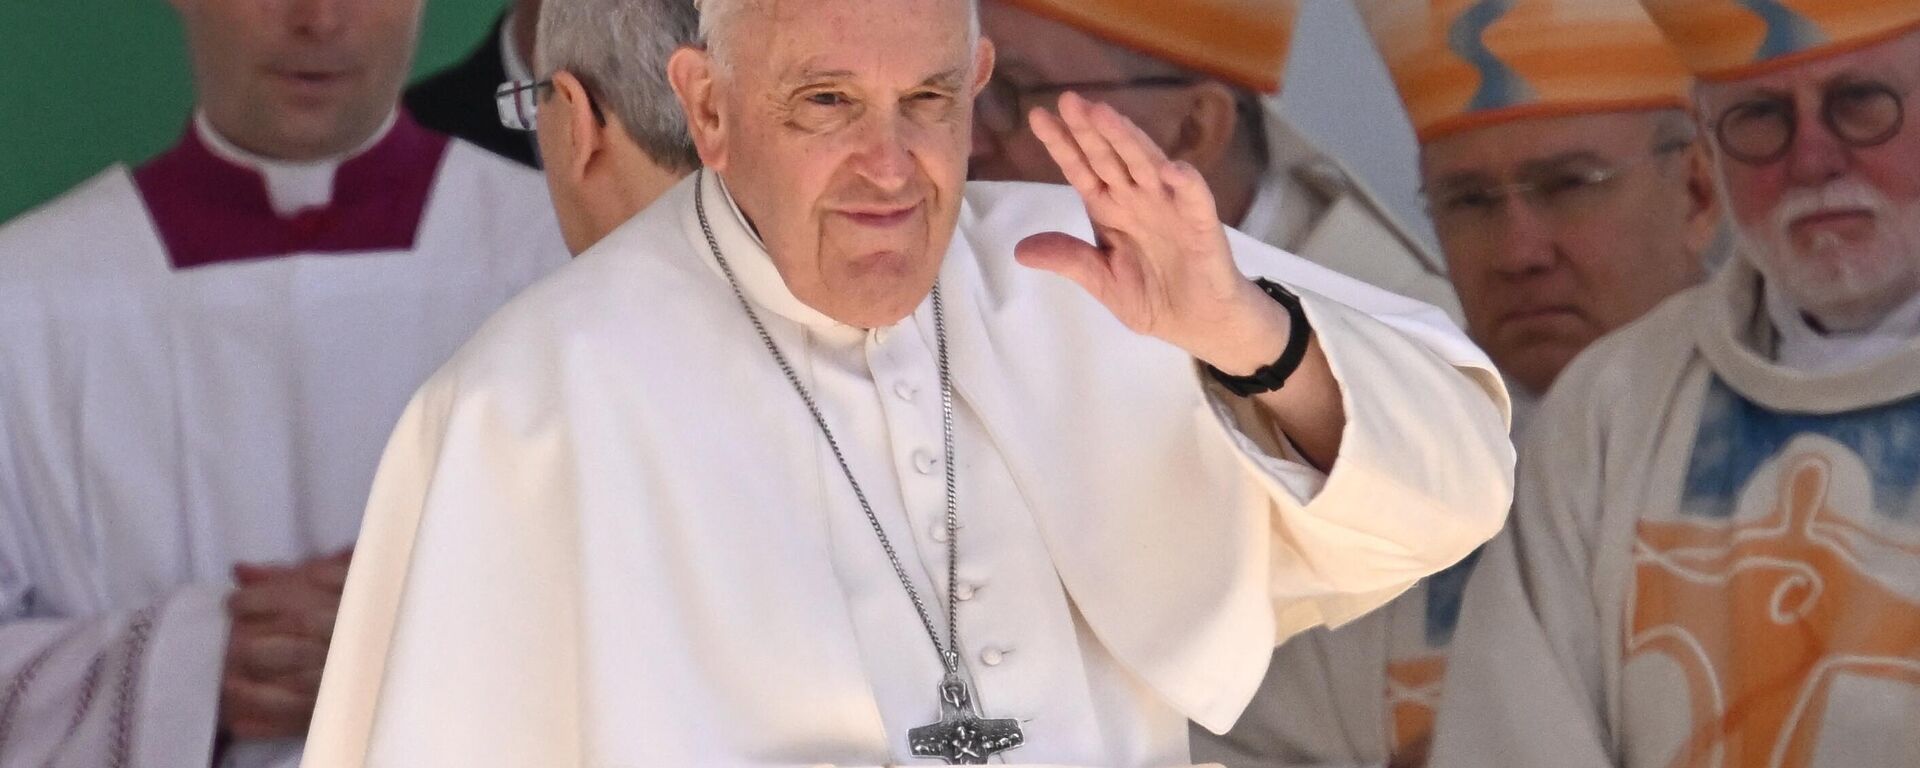 Pope Francis waves as he celebrates a holy mass at Kossuth Lajos' Square during his visit in Budapest on April 30, 2023, the last day of his tree-day trip to Hungary - Sputnik International, 1920, 01.05.2023